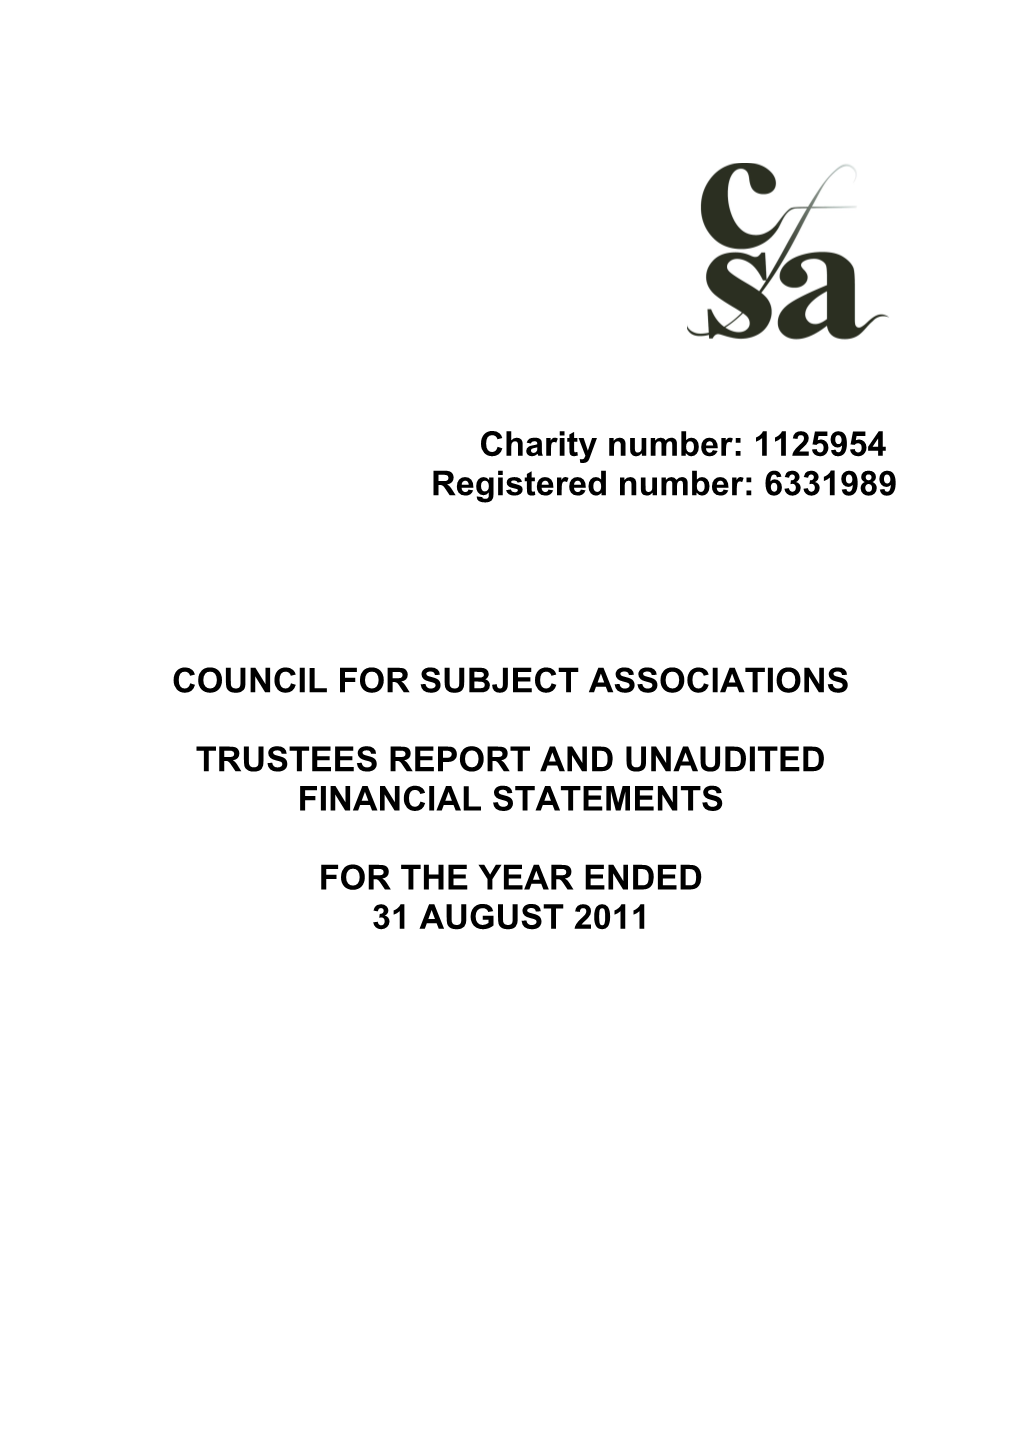 Council for Subject Associations